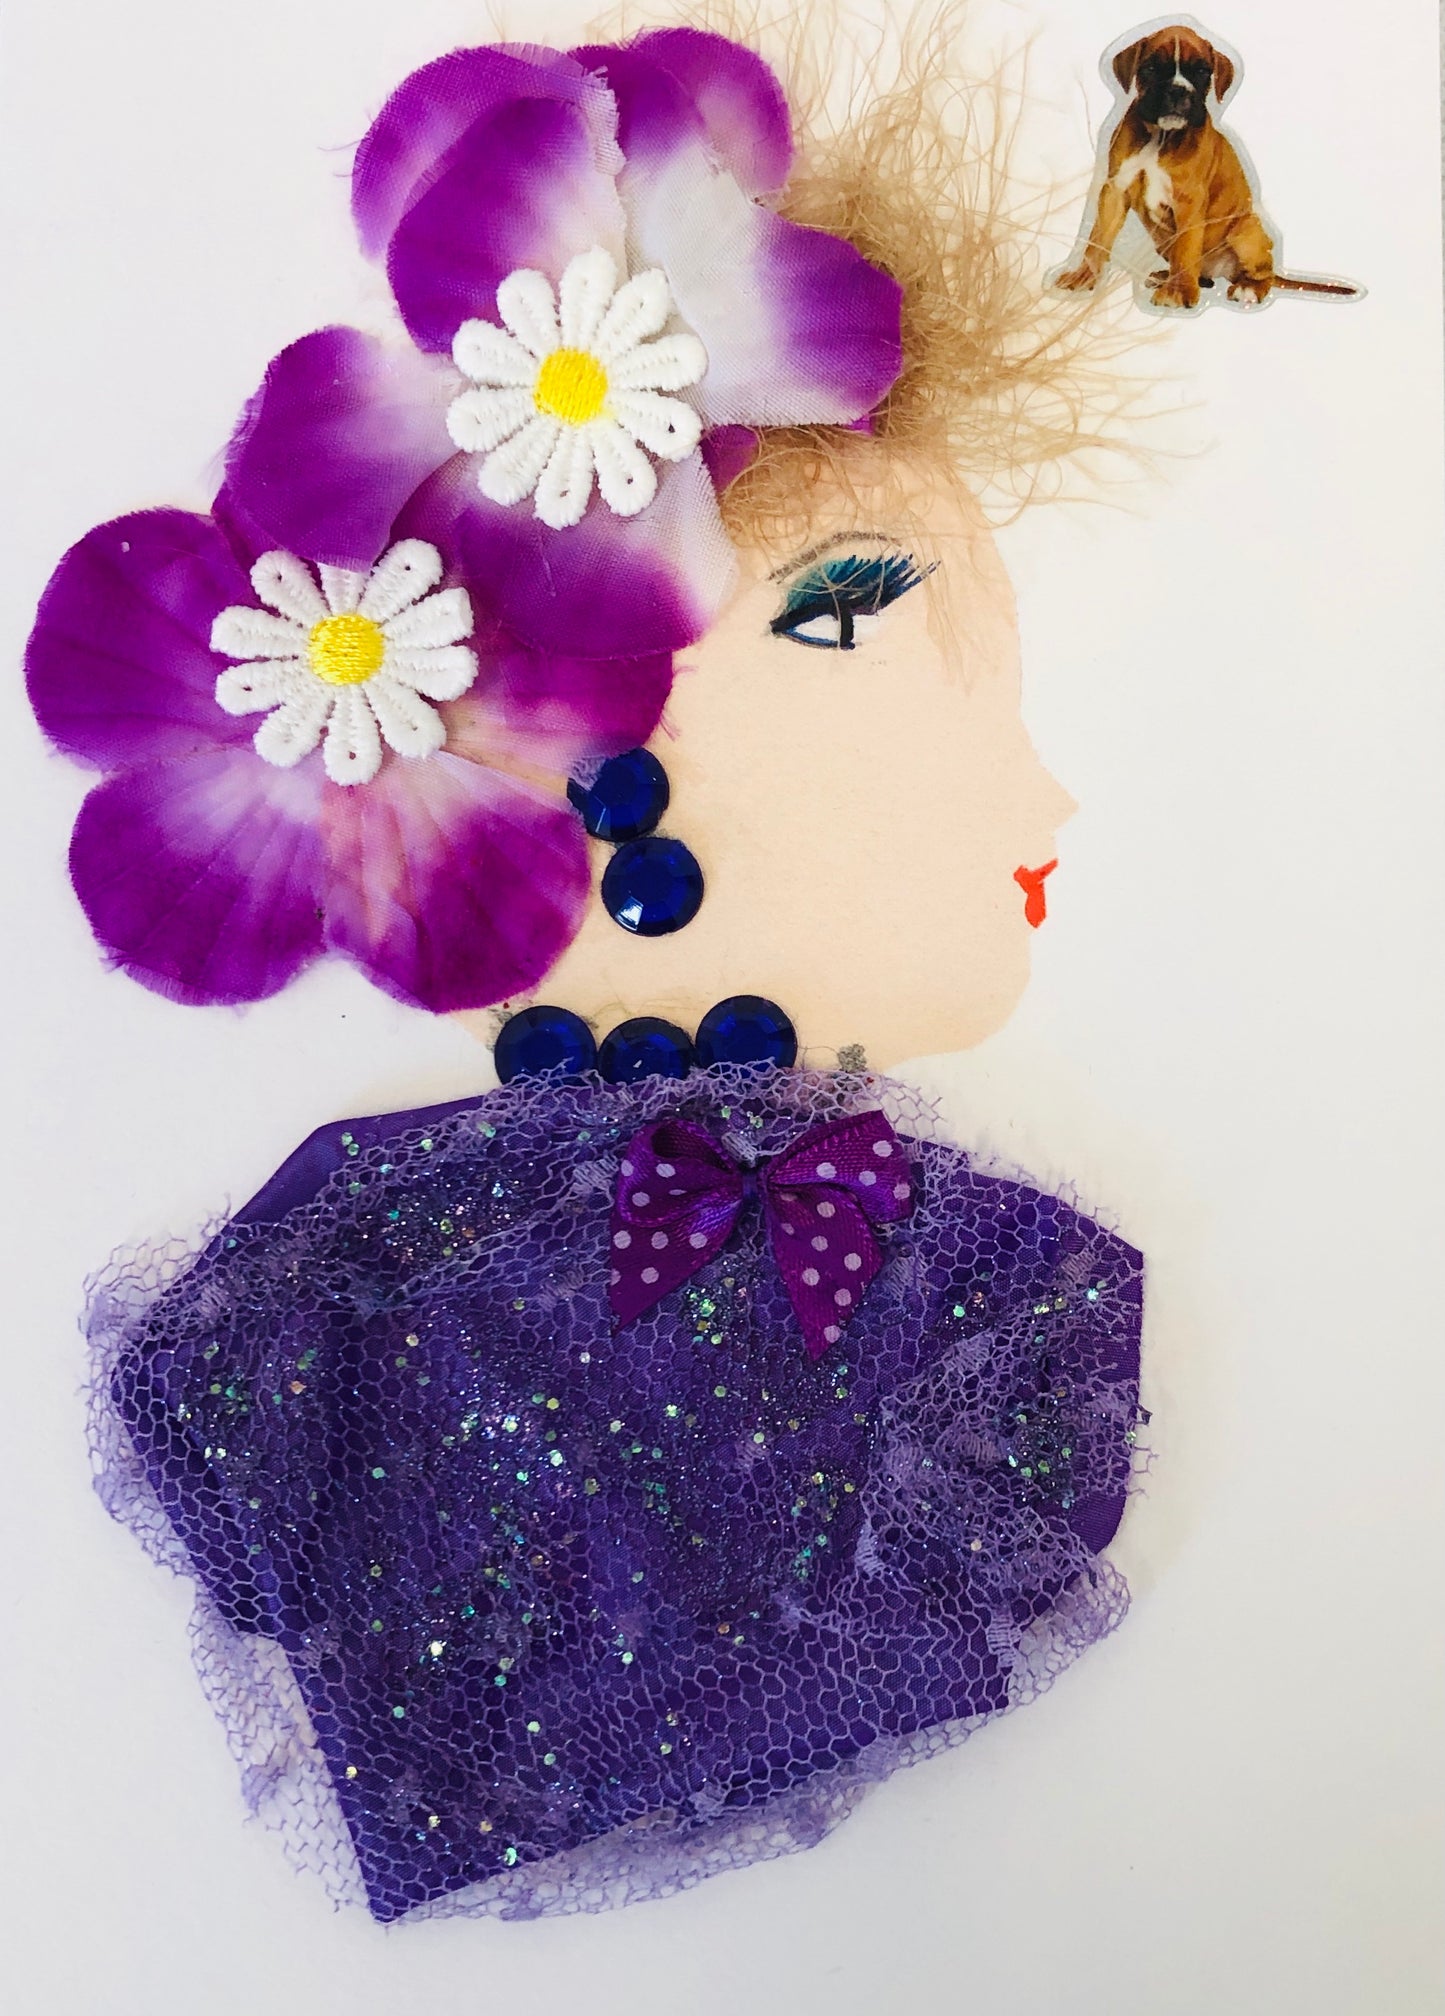 Kenton wears a glittery mesh blouse and two large purple flowers in her blonde string hair. In the top right corner, there is a small dog sticker. 